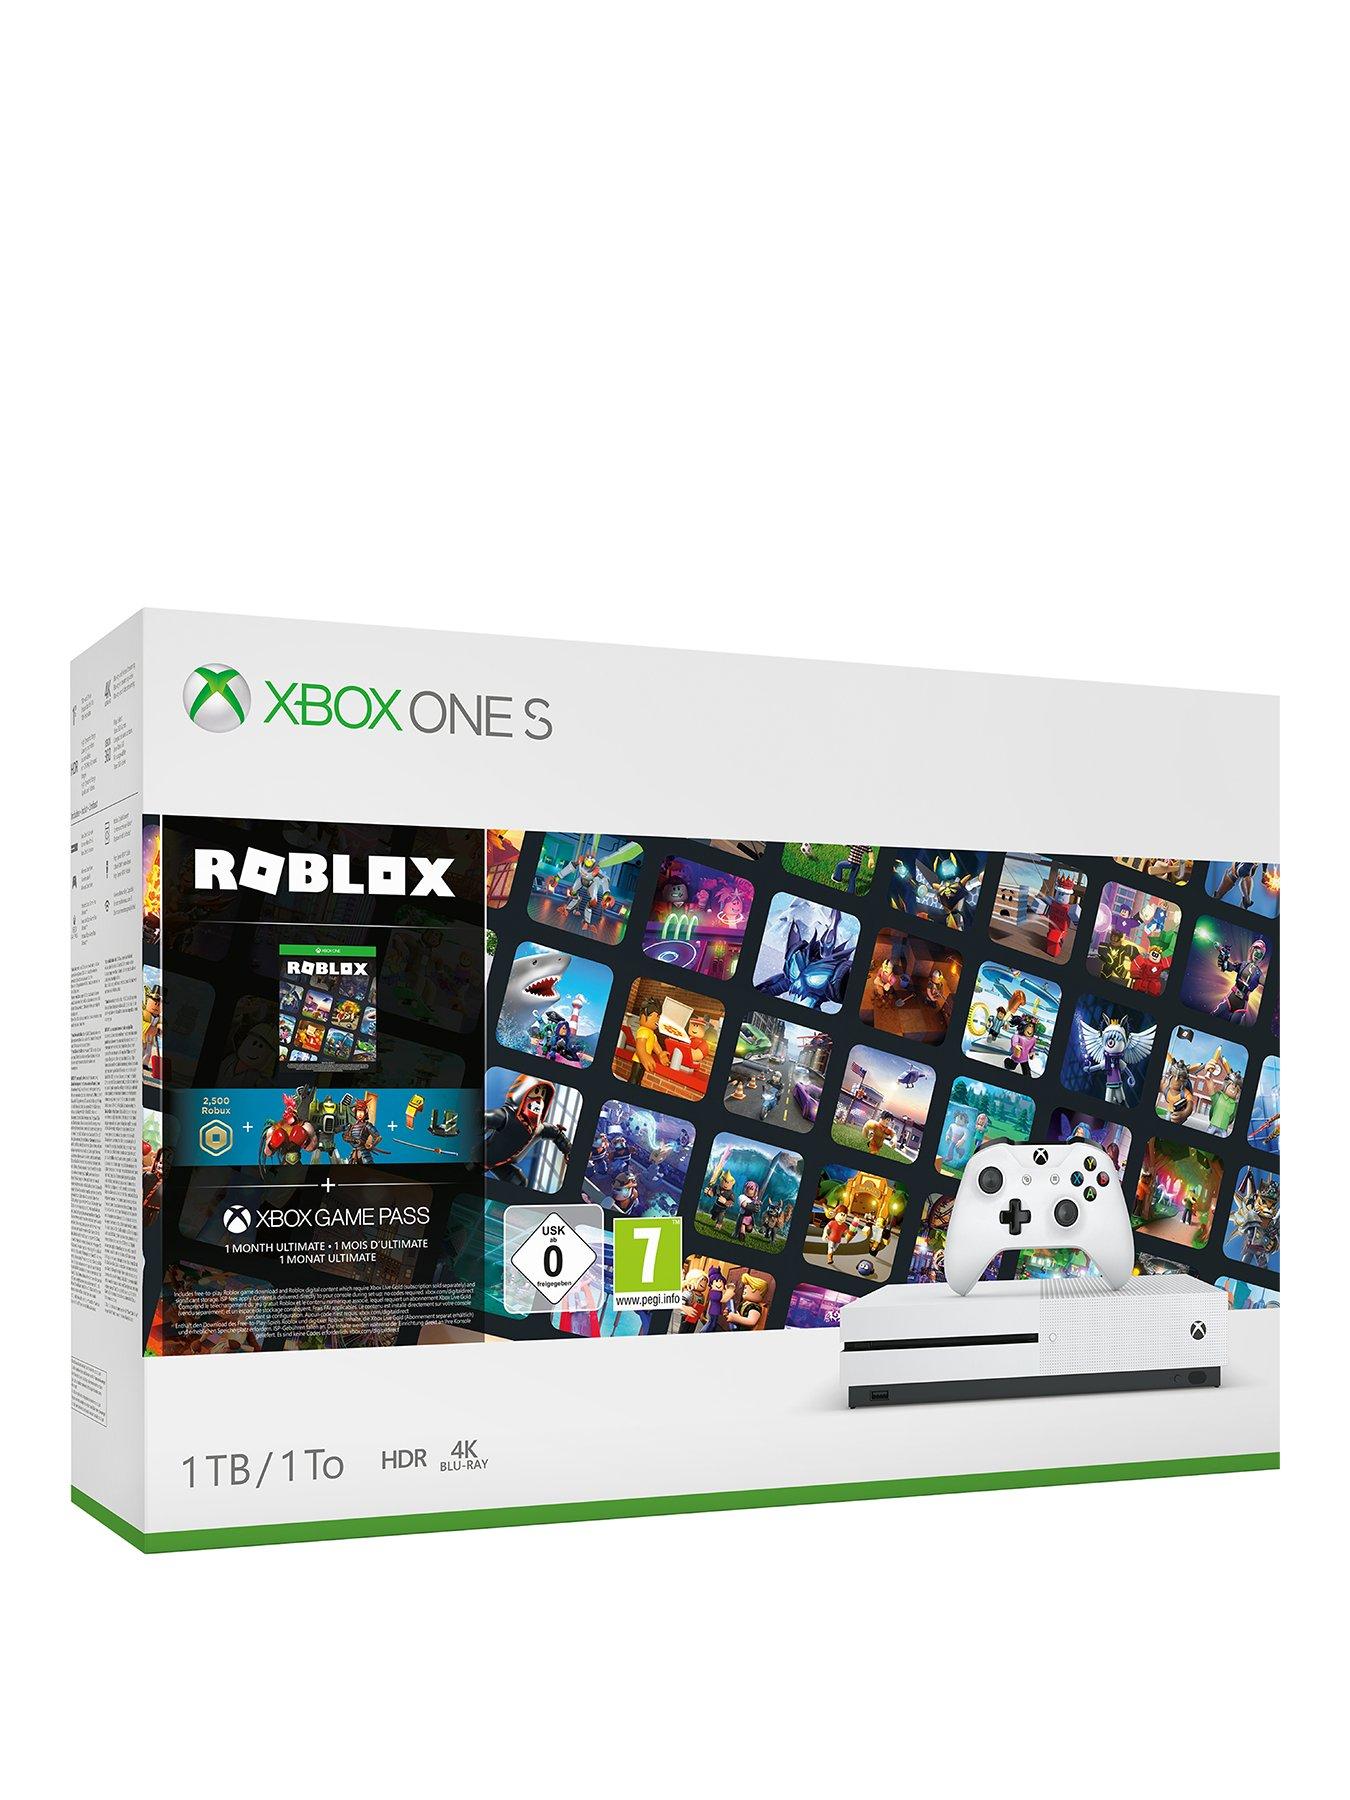 Xbox One S With Roblox Bundle And Optional Extras 1tb Console White Littlewoodsireland Ie - xbox boys roblox